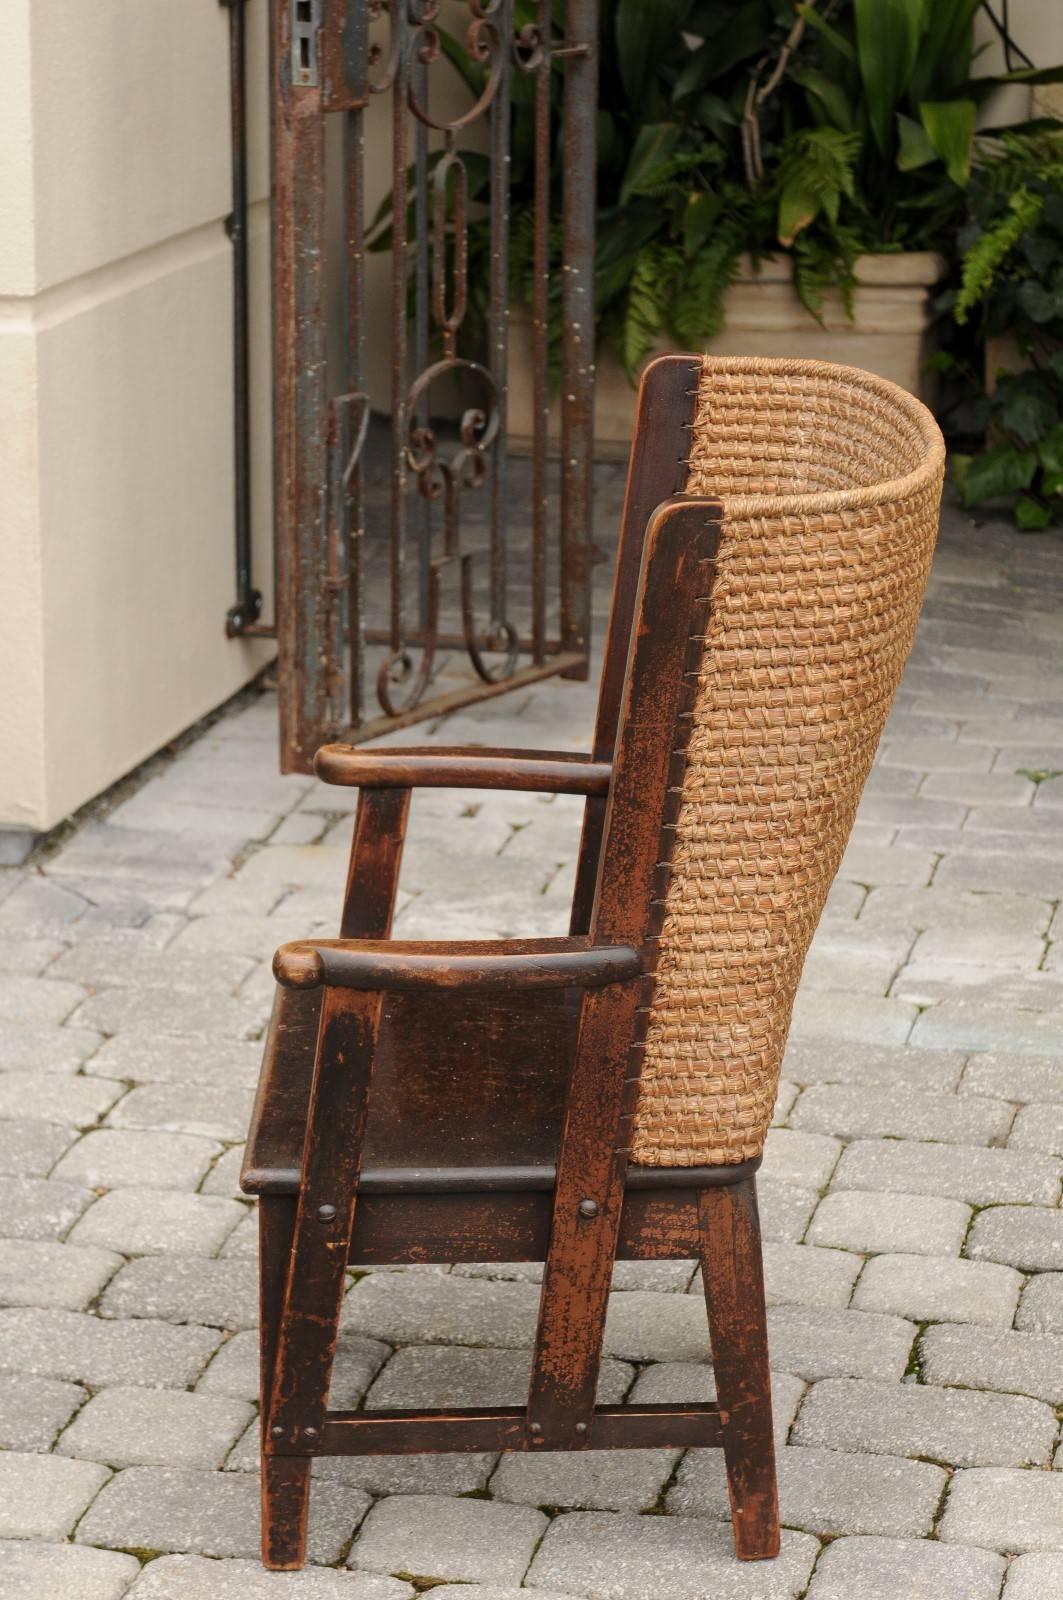 Hand-Woven Antique Scottish Mid-19th Century Orkney Chair with Handwoven Straw Back